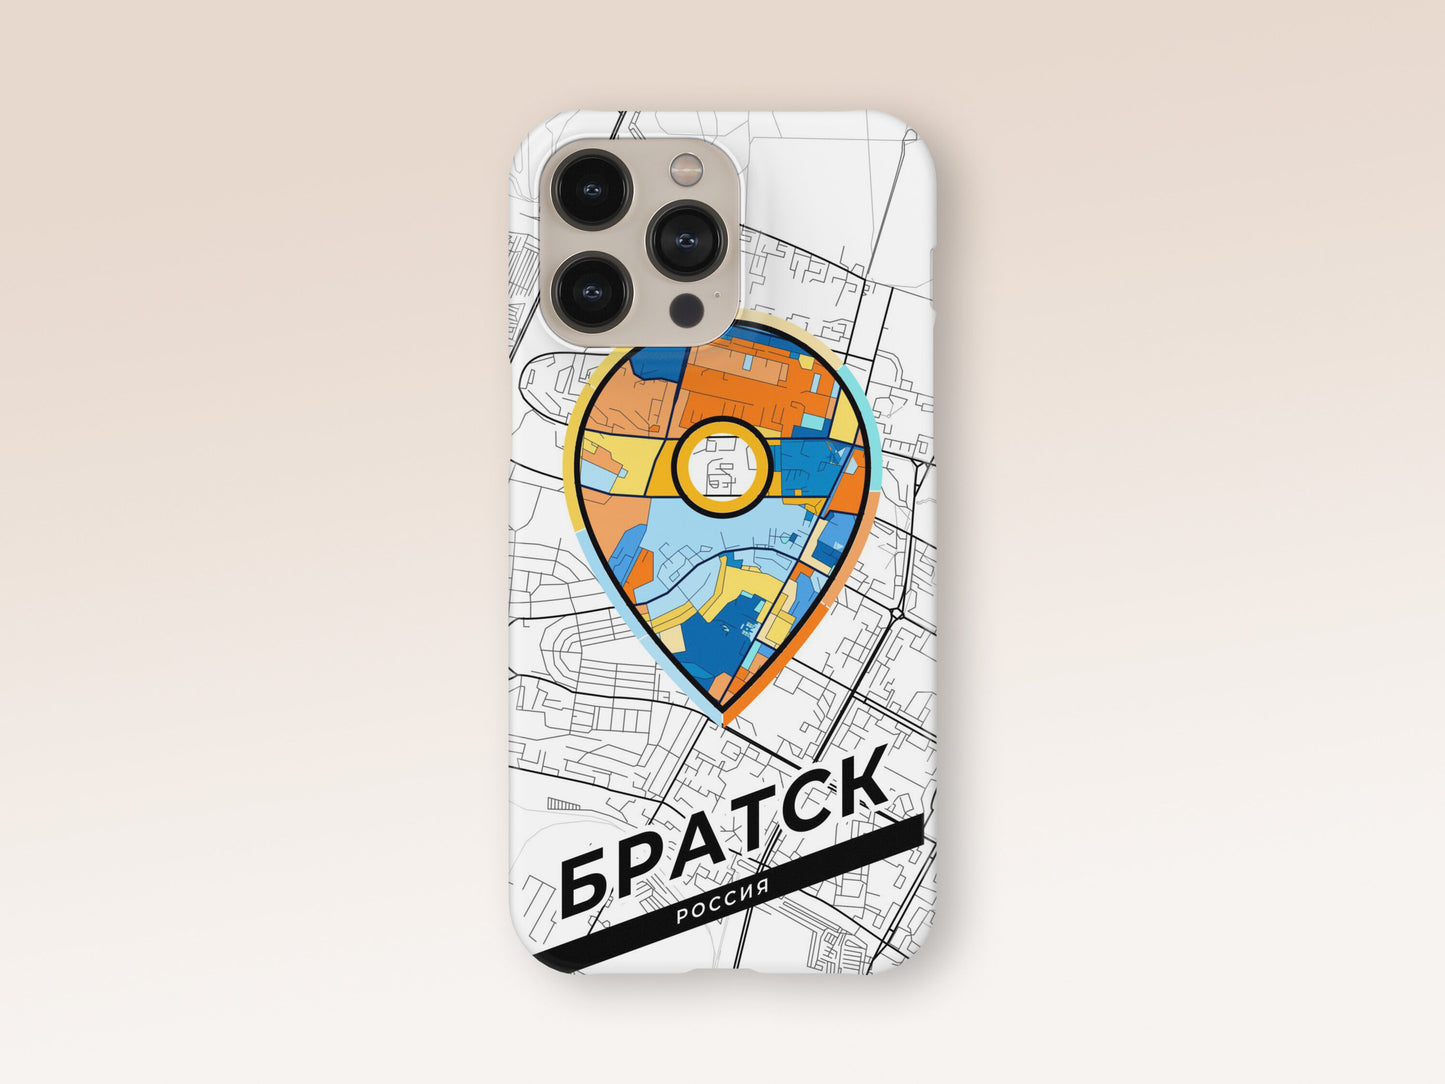 Bratsk Russia slim phone case with colorful icon. Birthday, wedding or housewarming gift. Couple match cases. 1